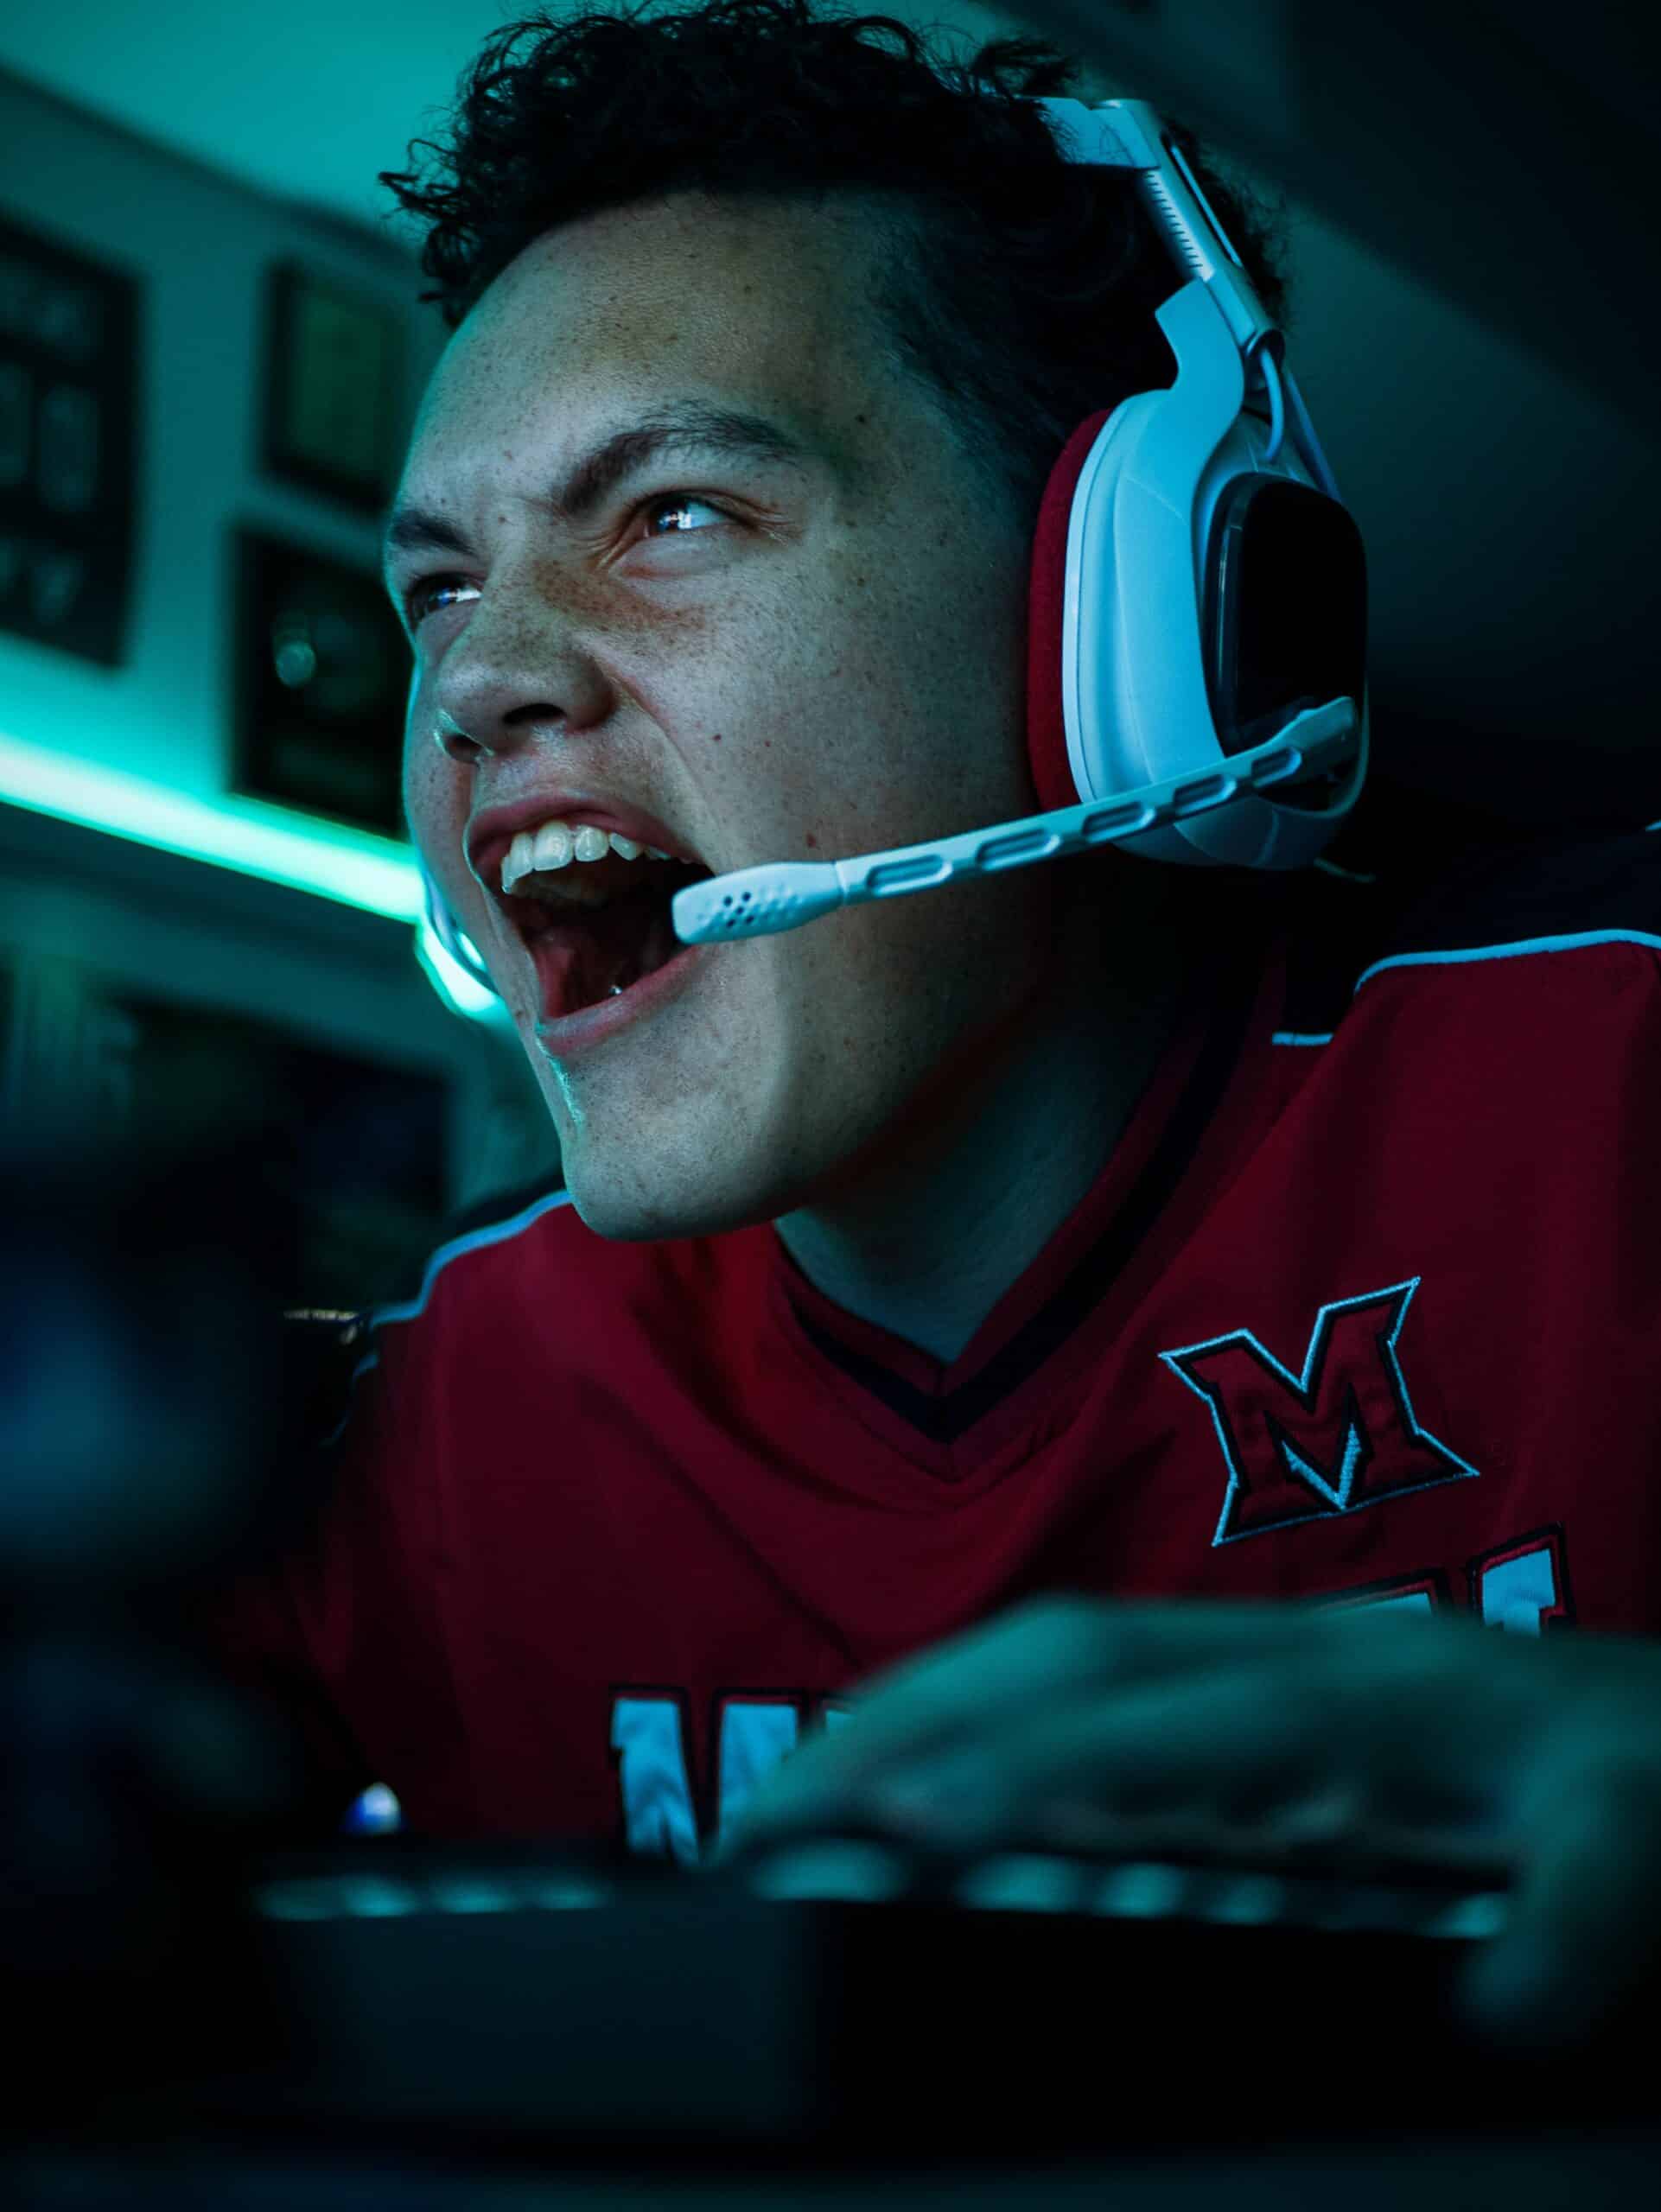 A computer gamer enthusiastic playing in an e-sports competition